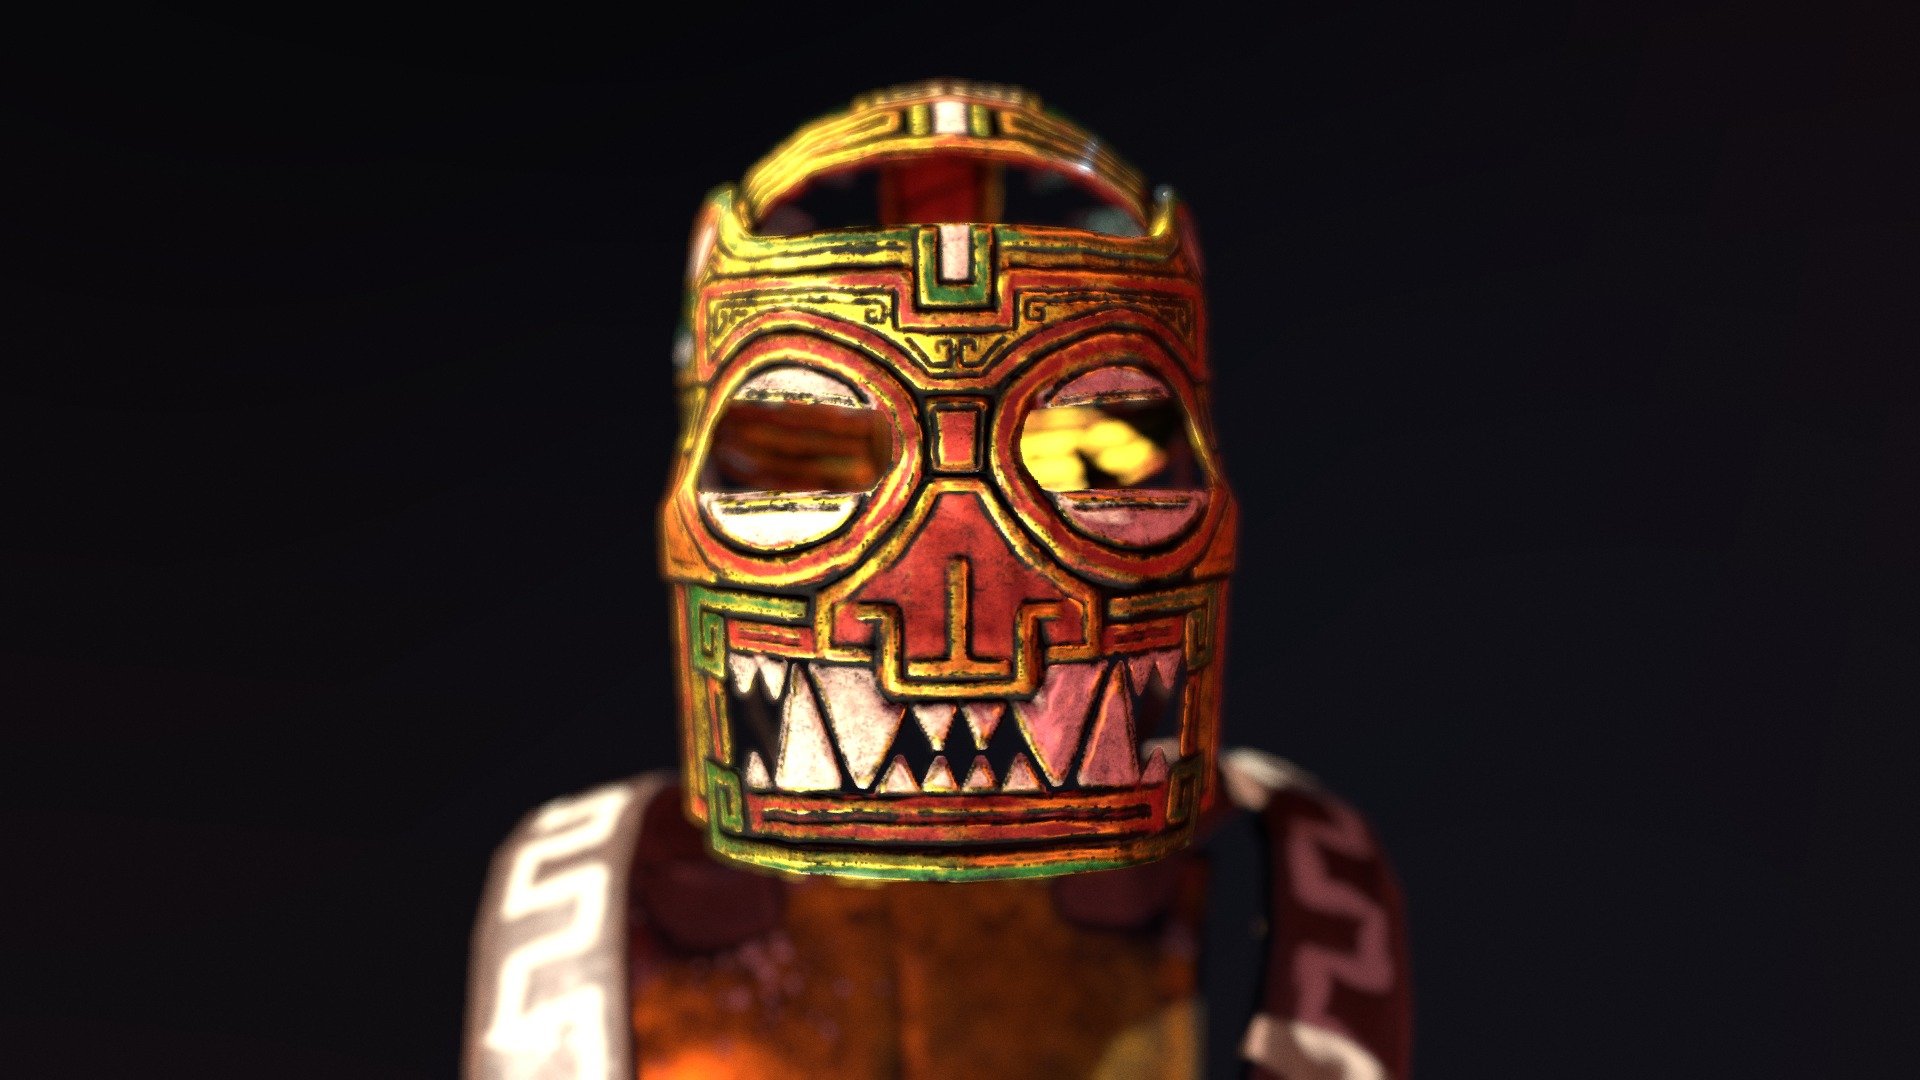 An aztec/mayan themed skin set for the Metal armor in Rust 3d model